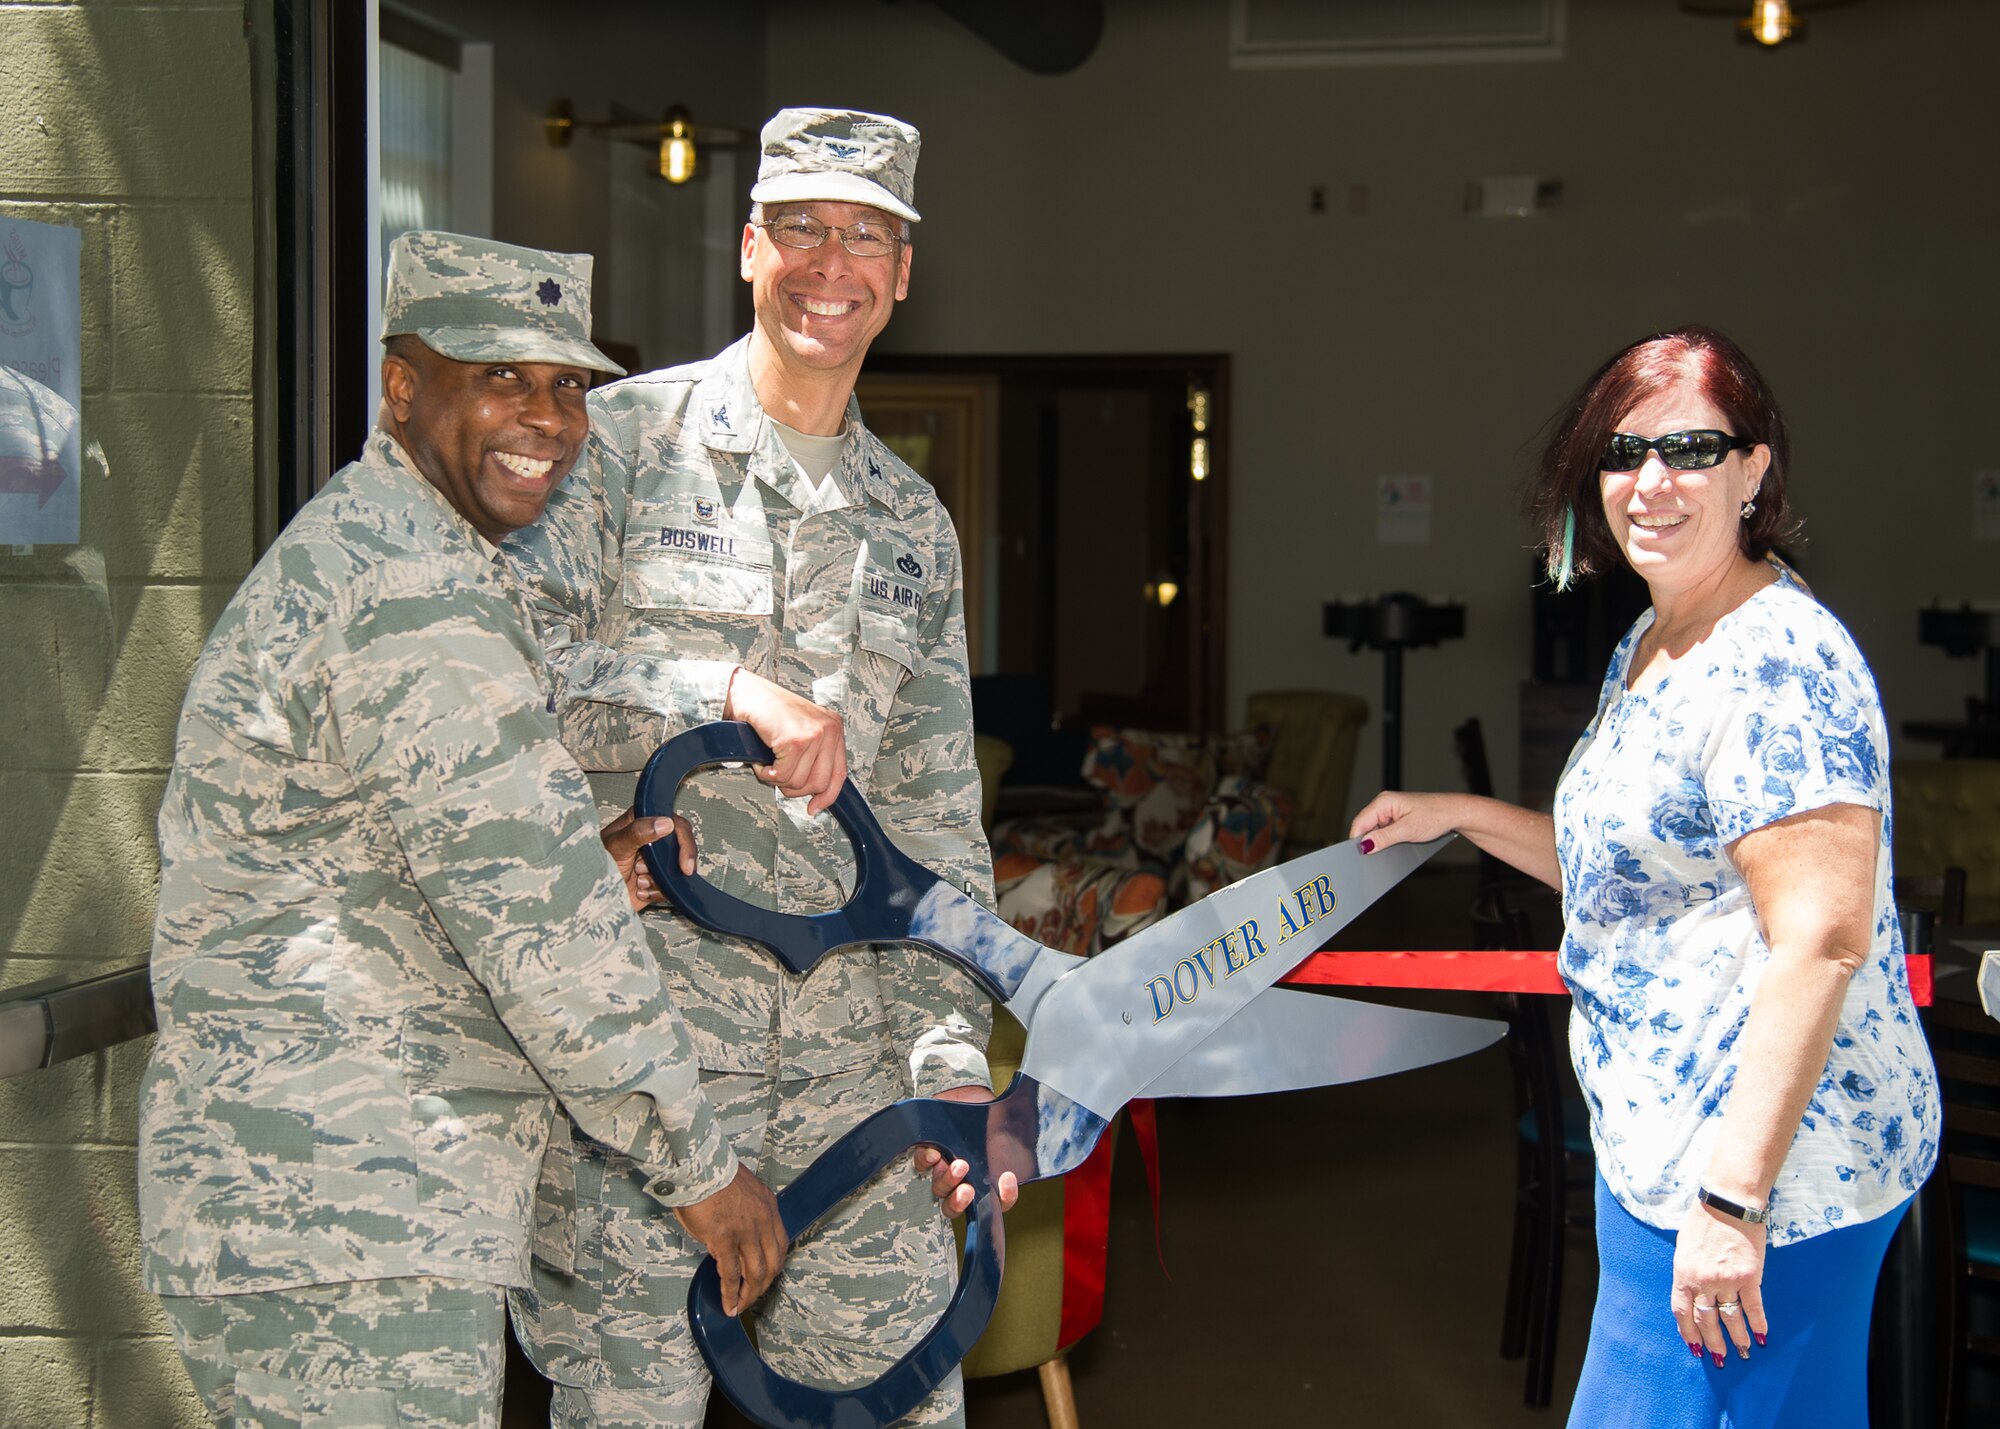 From left, Lt. Col. Arnold Mosley 436th Force Support Squadron commander, Col. Randy Boswell, 436th Mission Support Group commander and Mindy Hildebrand, 436th Force Support Squadron Community Services flight chief, at the ribbon cutting ceremony for Mugs Coffee Bar May 1, 2018, at Dover Air Force Base, Del. The coffee bar held a soft opening the week prior offering free refreshments and officially opened for business May 1. (U.S. Air Force photo by Mauricio Campino)